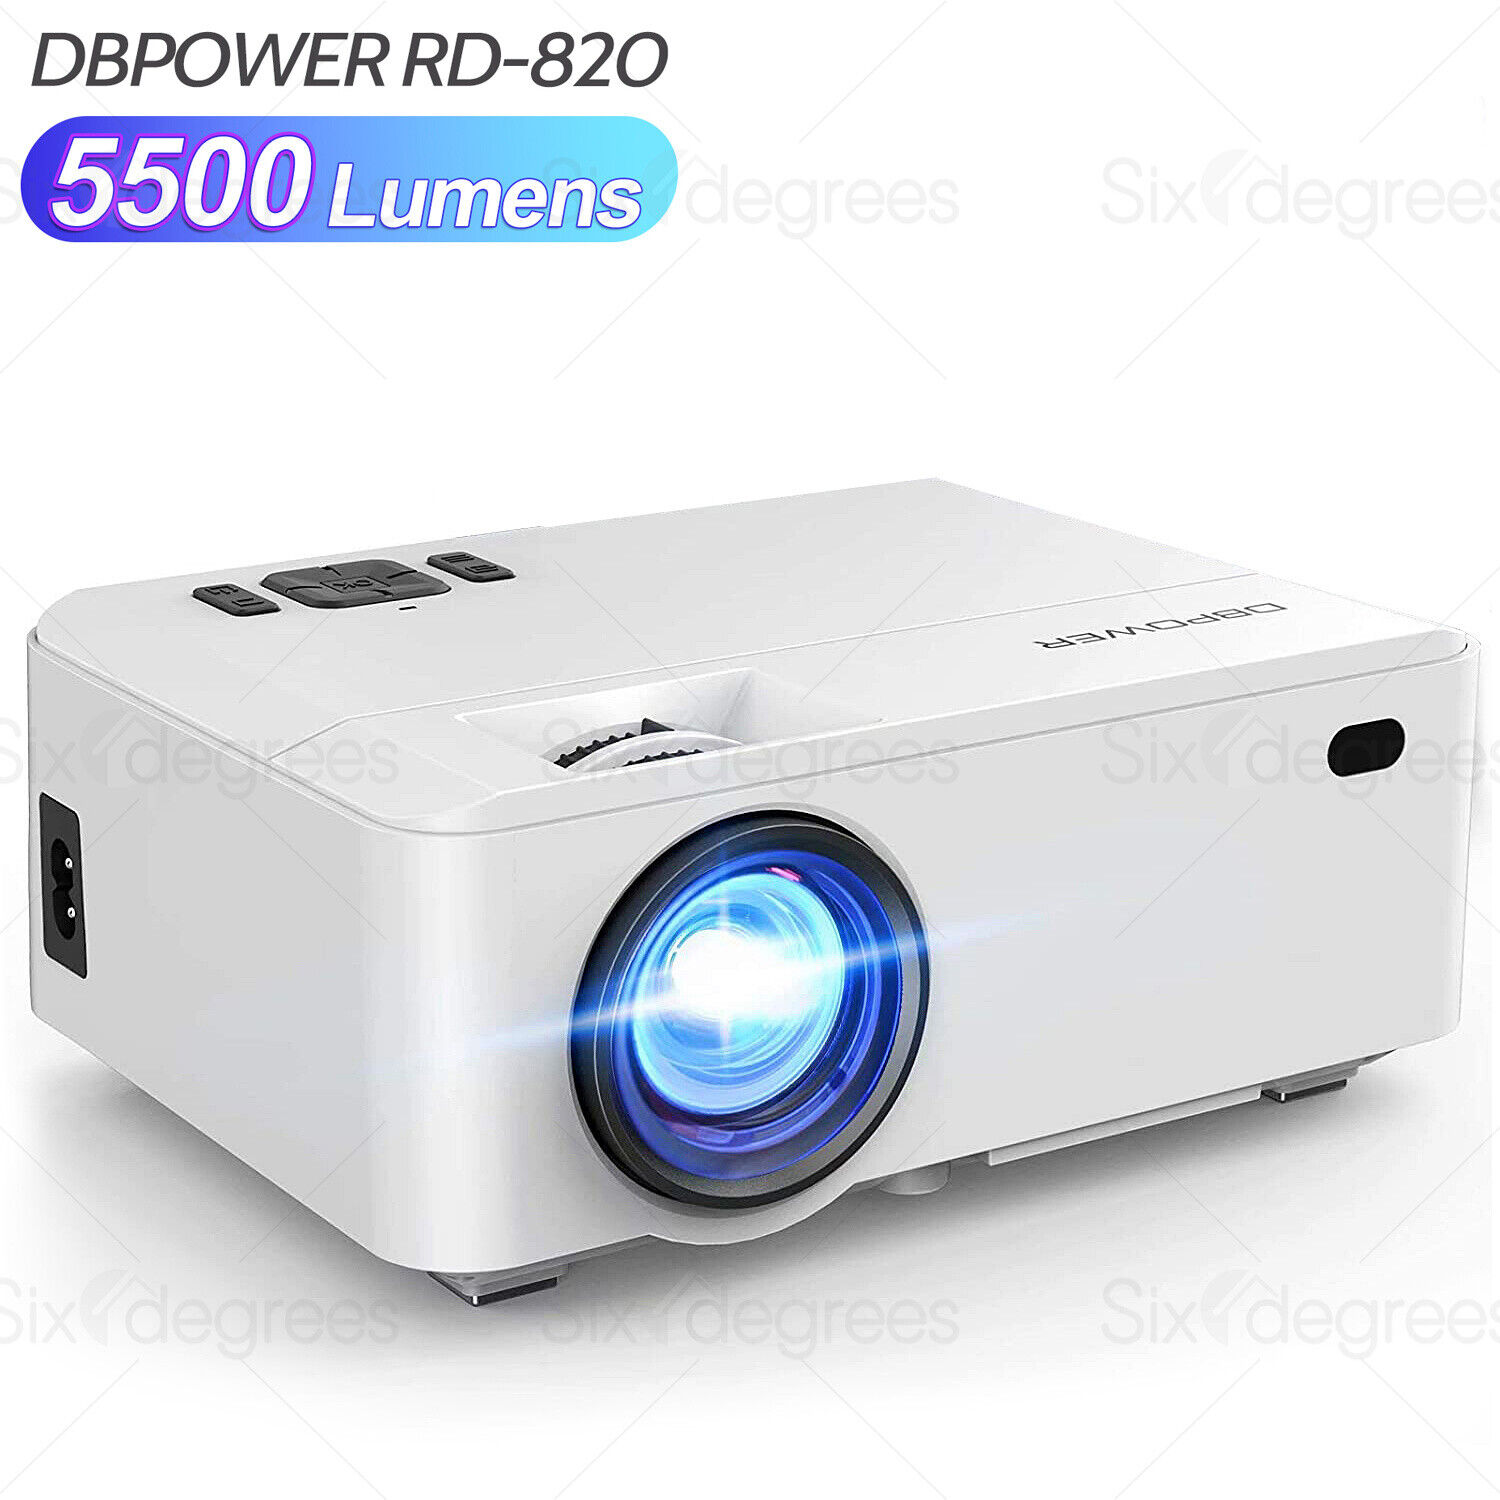 DBPOWER RD-820 Mini Portable Projector LCD 5500Lux 1080P 40